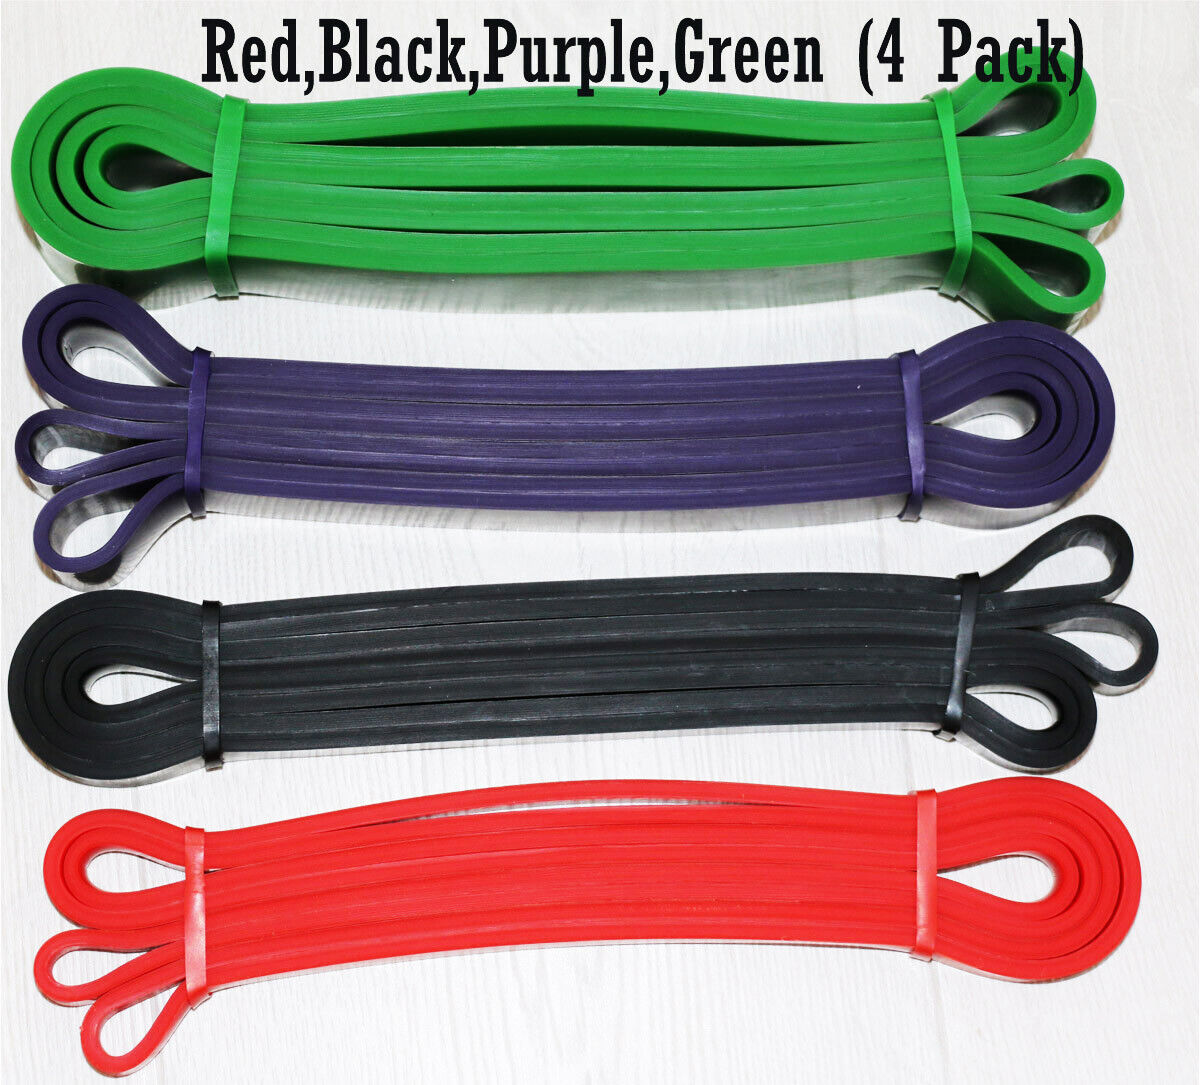 Heavy Resistance Bands